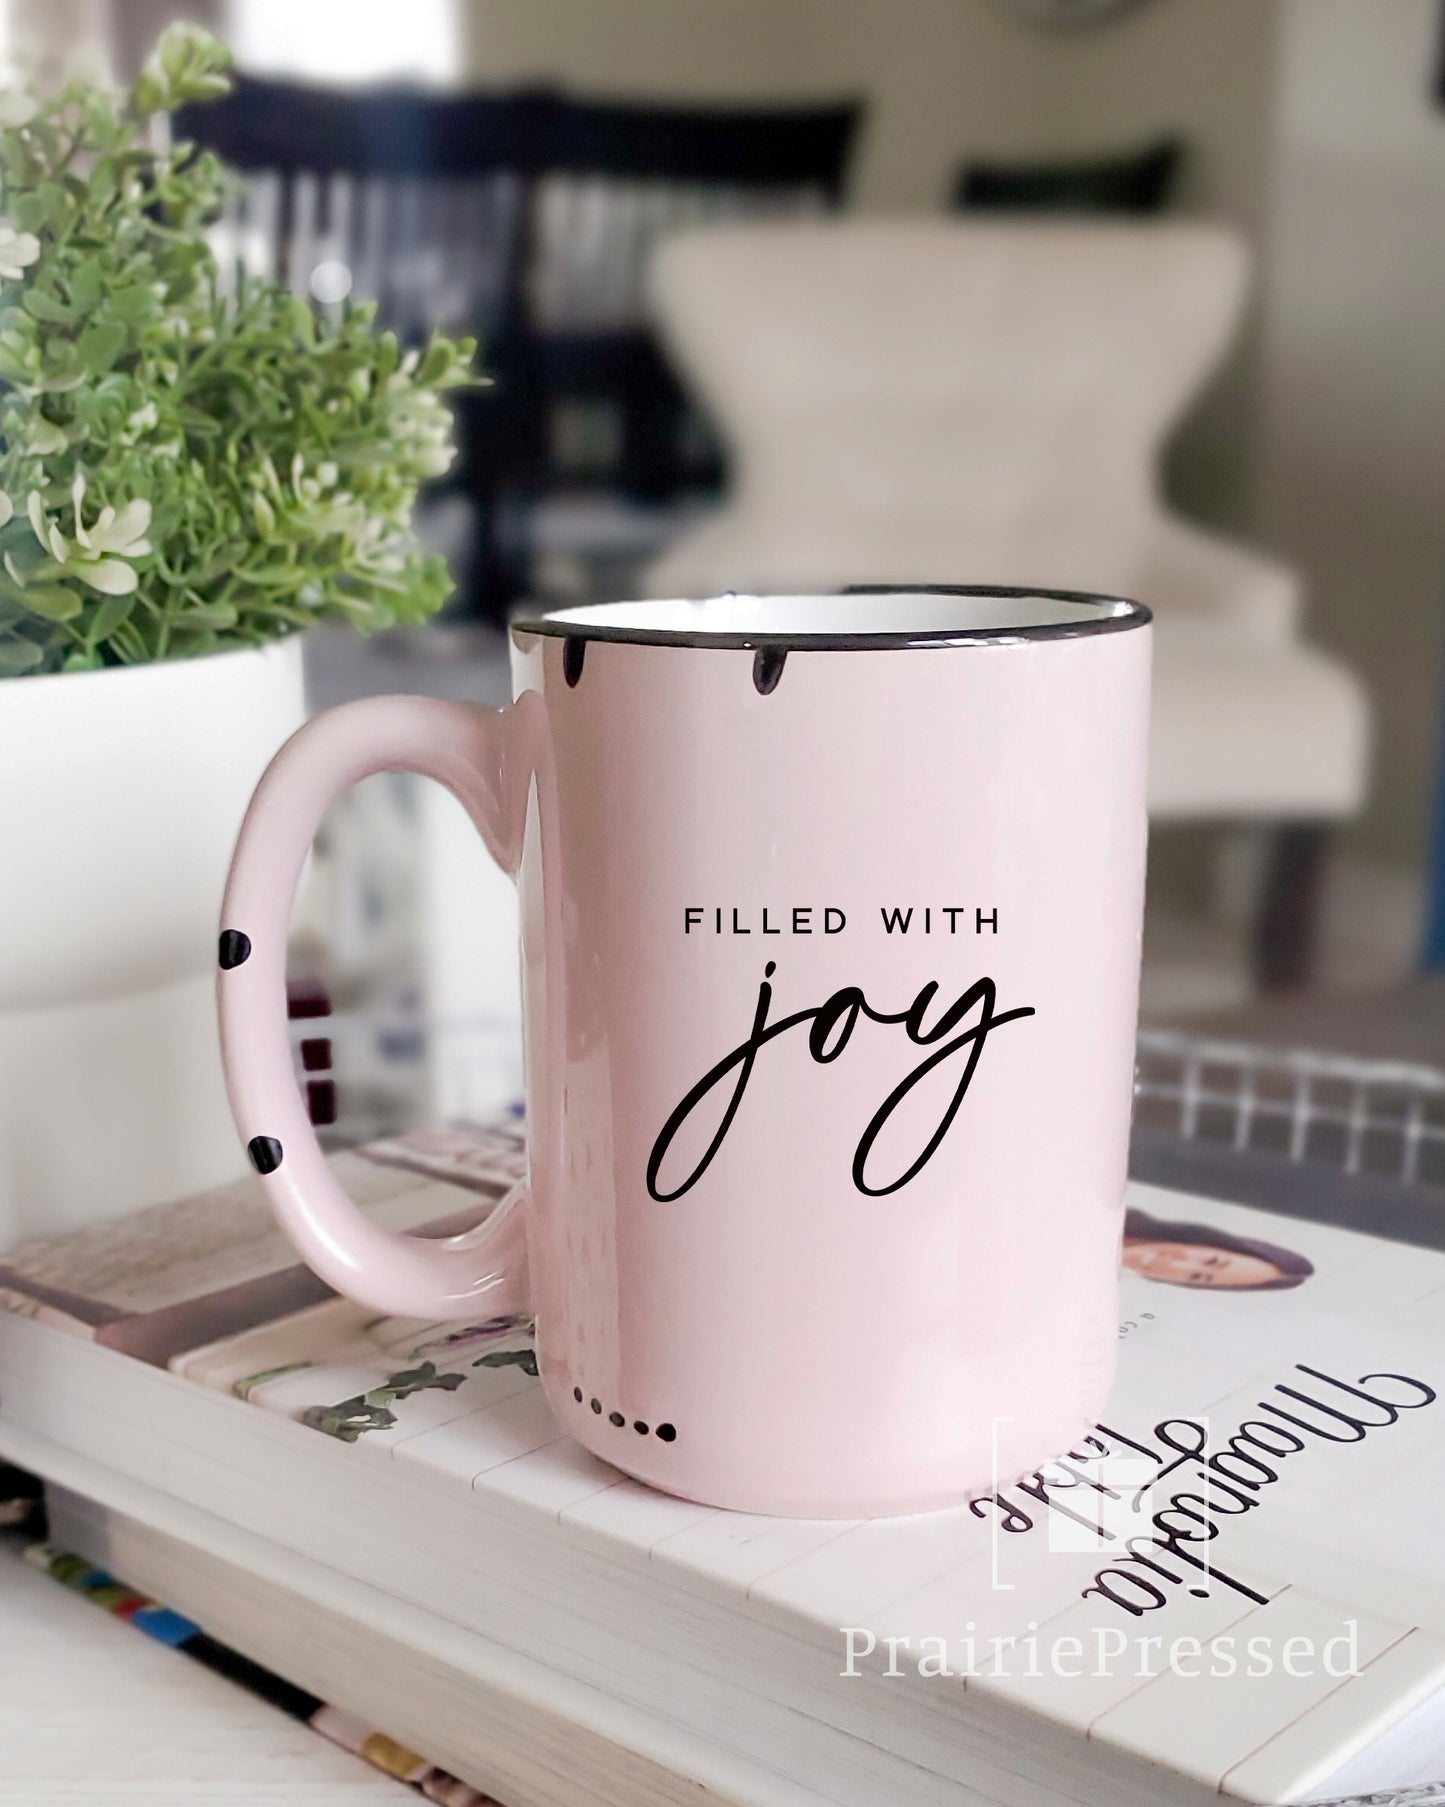 Filled with Joy Rustic Chipped Ceramic Mug